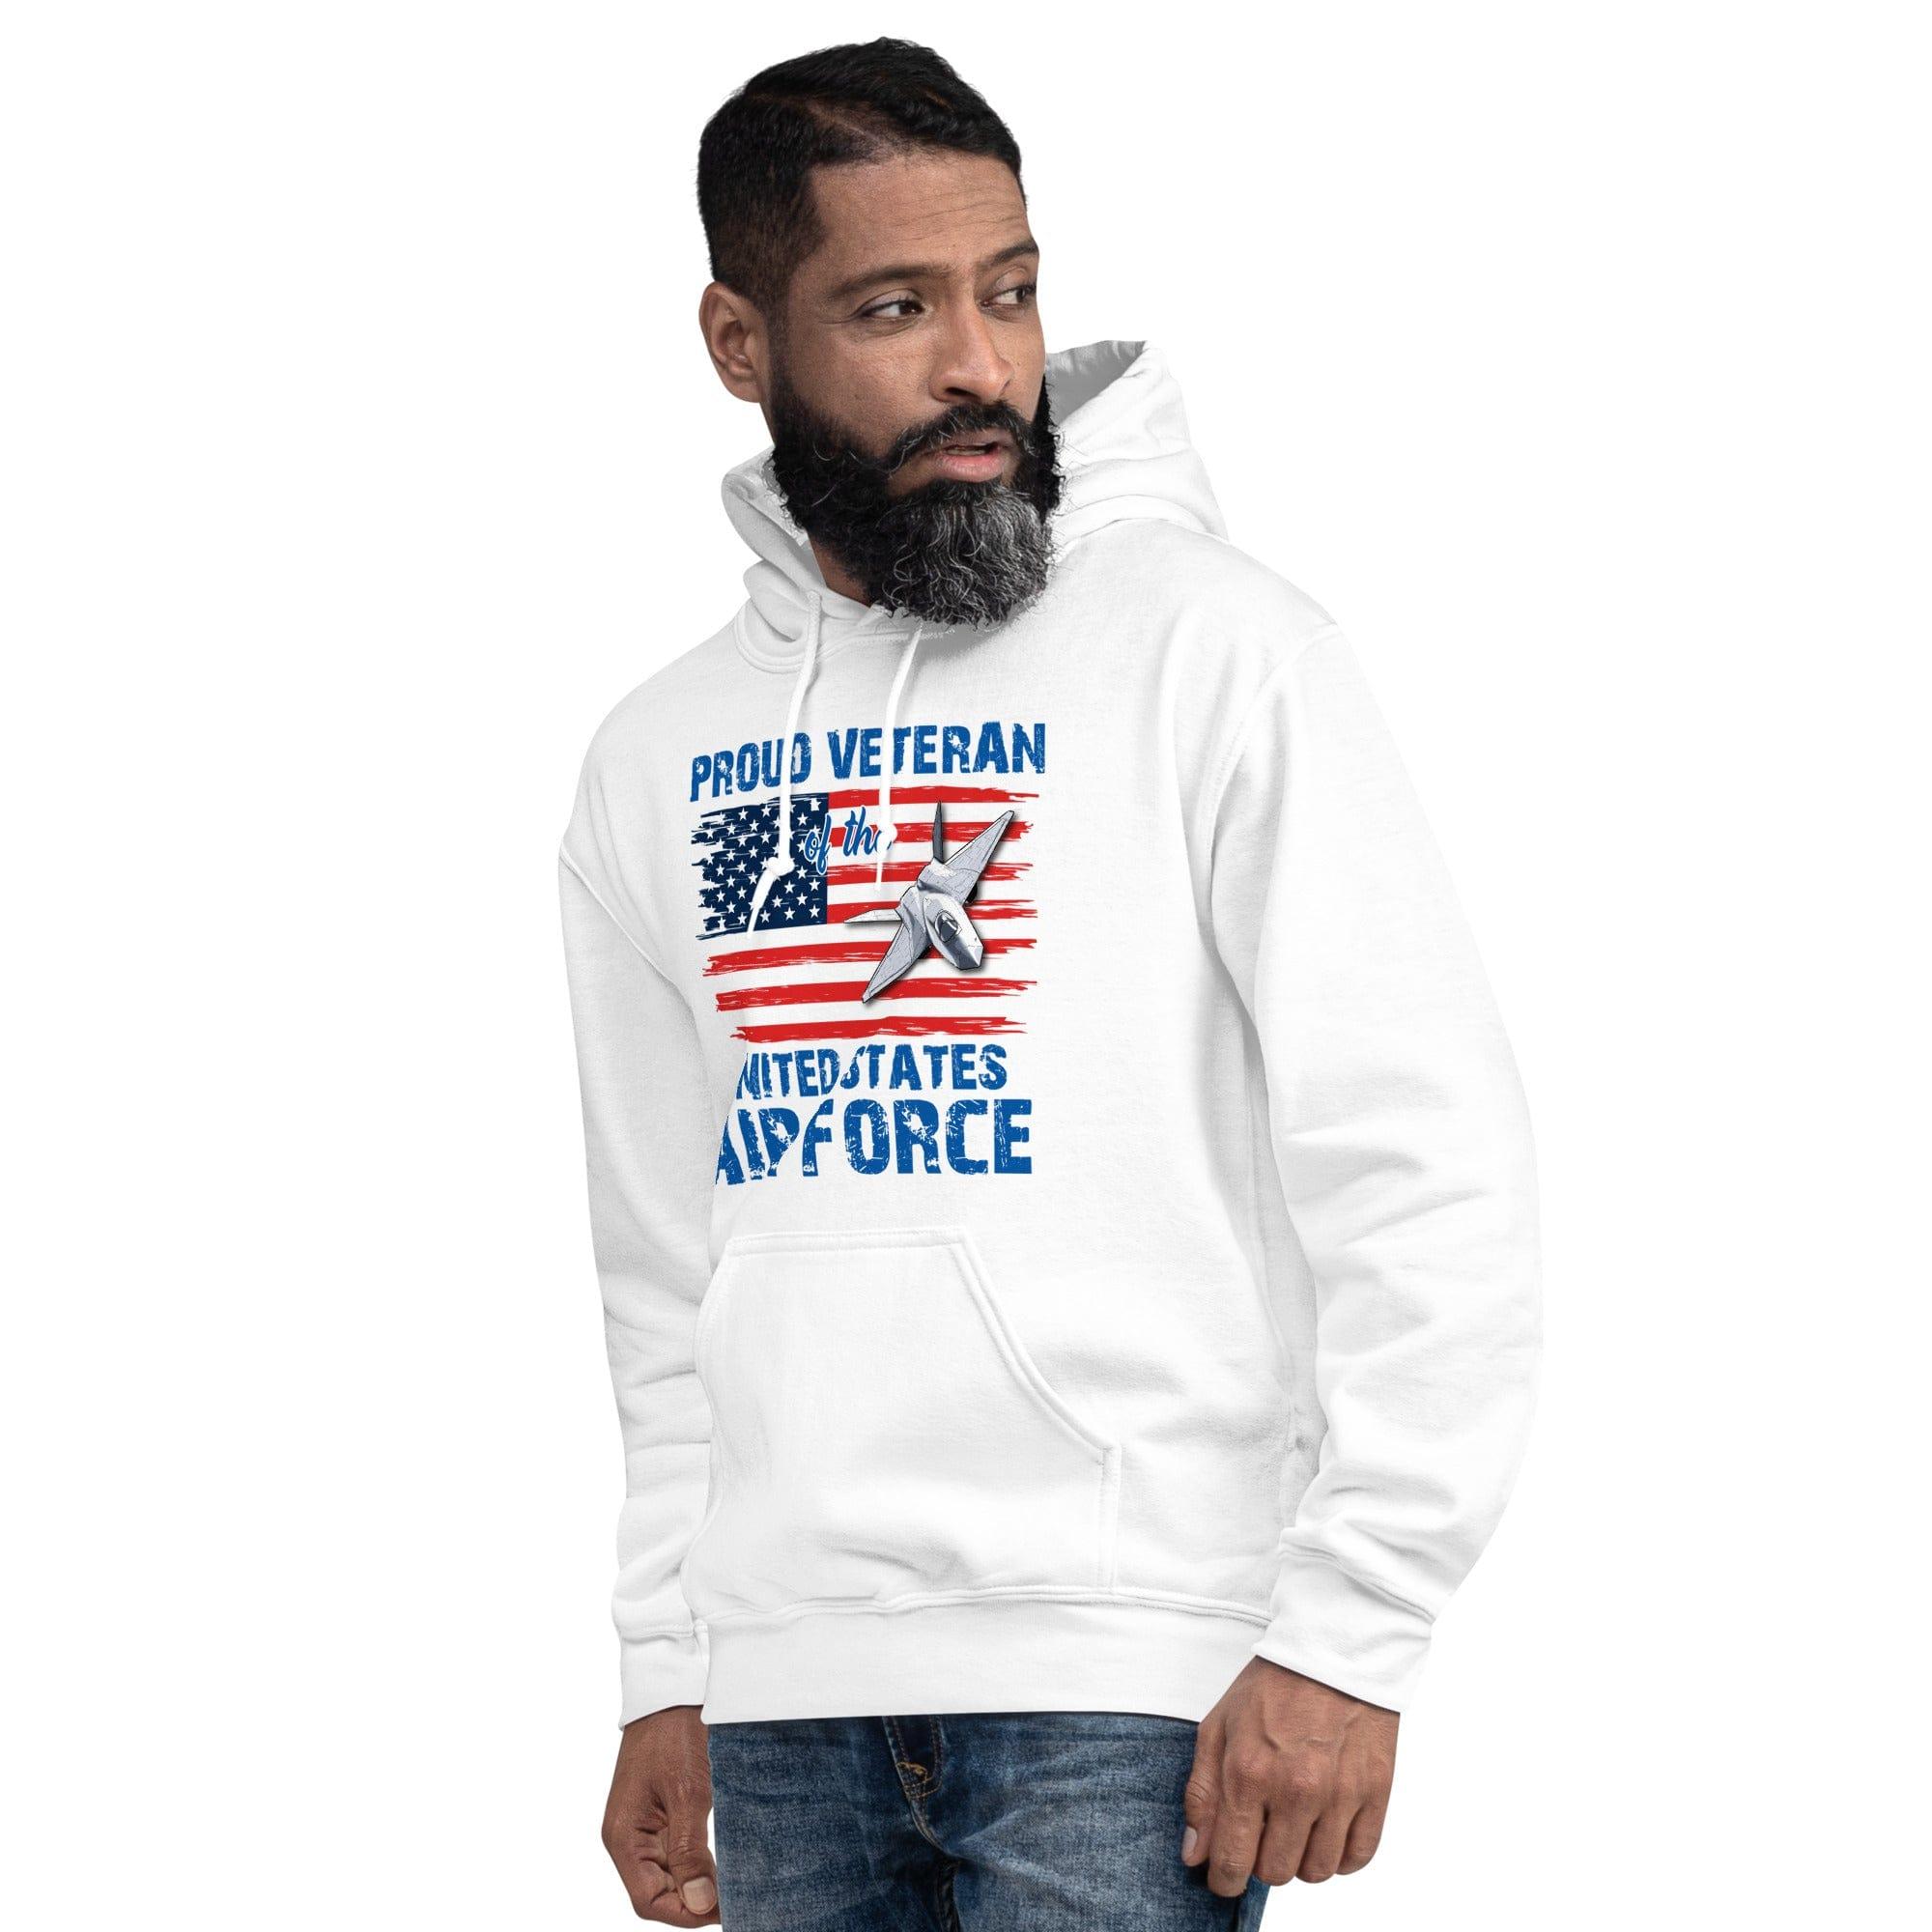 Air Force Hoodie Proud Veteran of the Unites States Air Force Unisex Pullover - TopKoalaTee